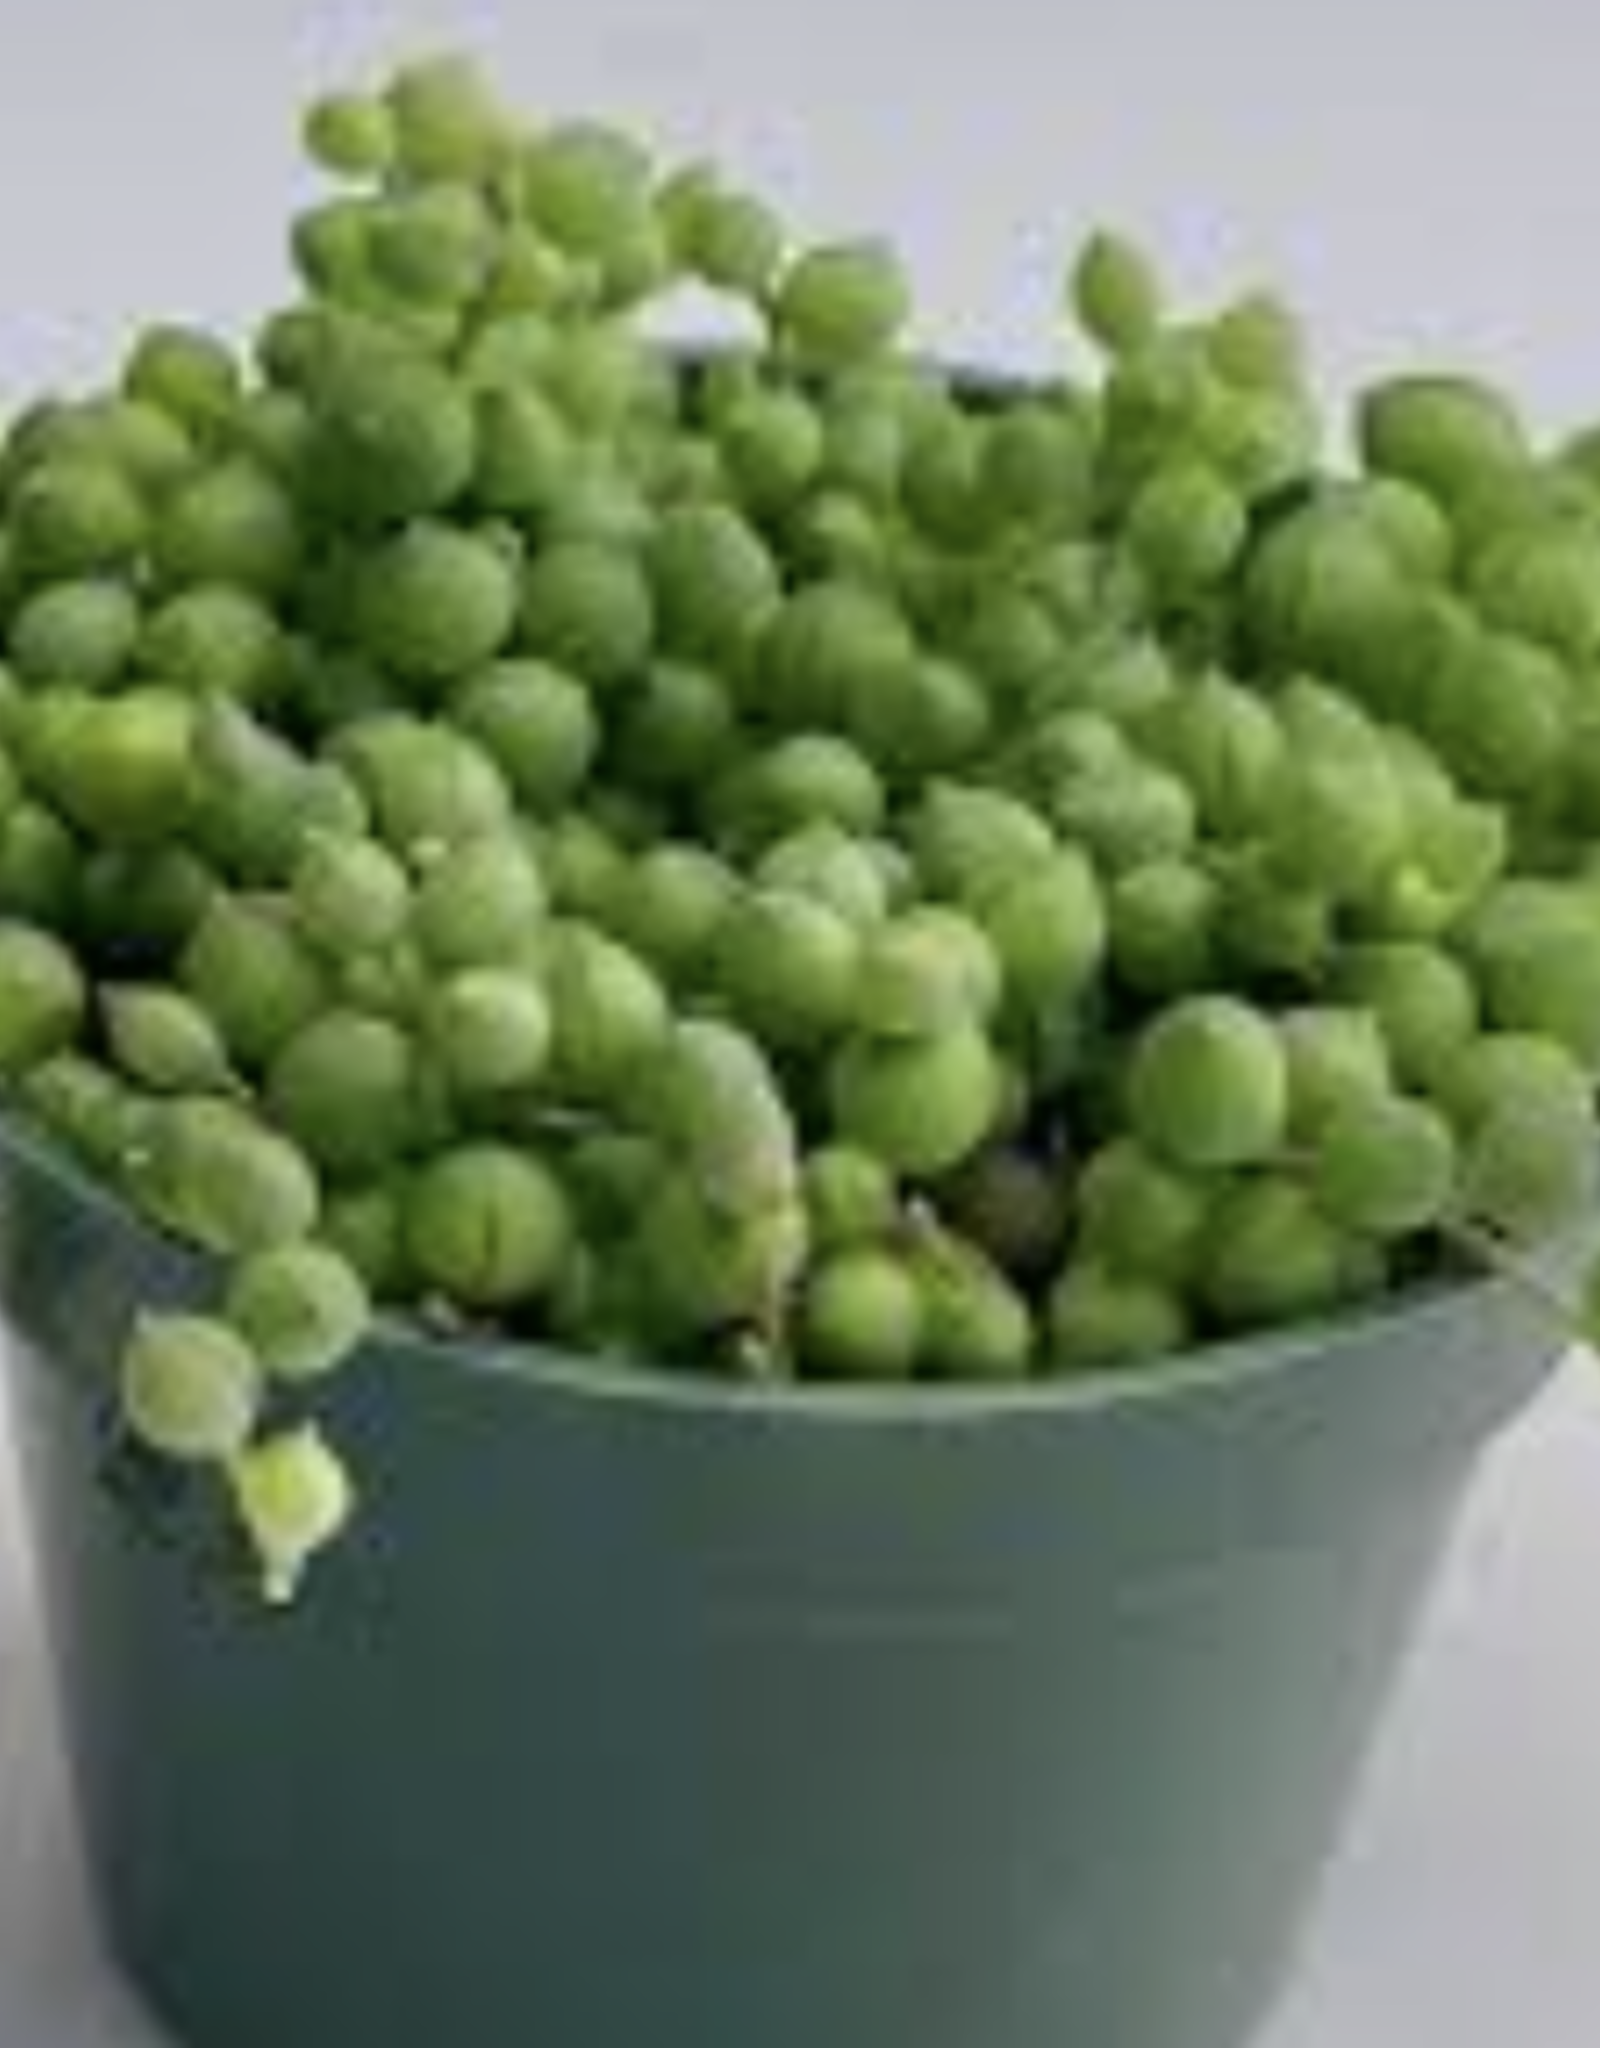 Seasonal Succulent & Accent Foliage - String of Pearls